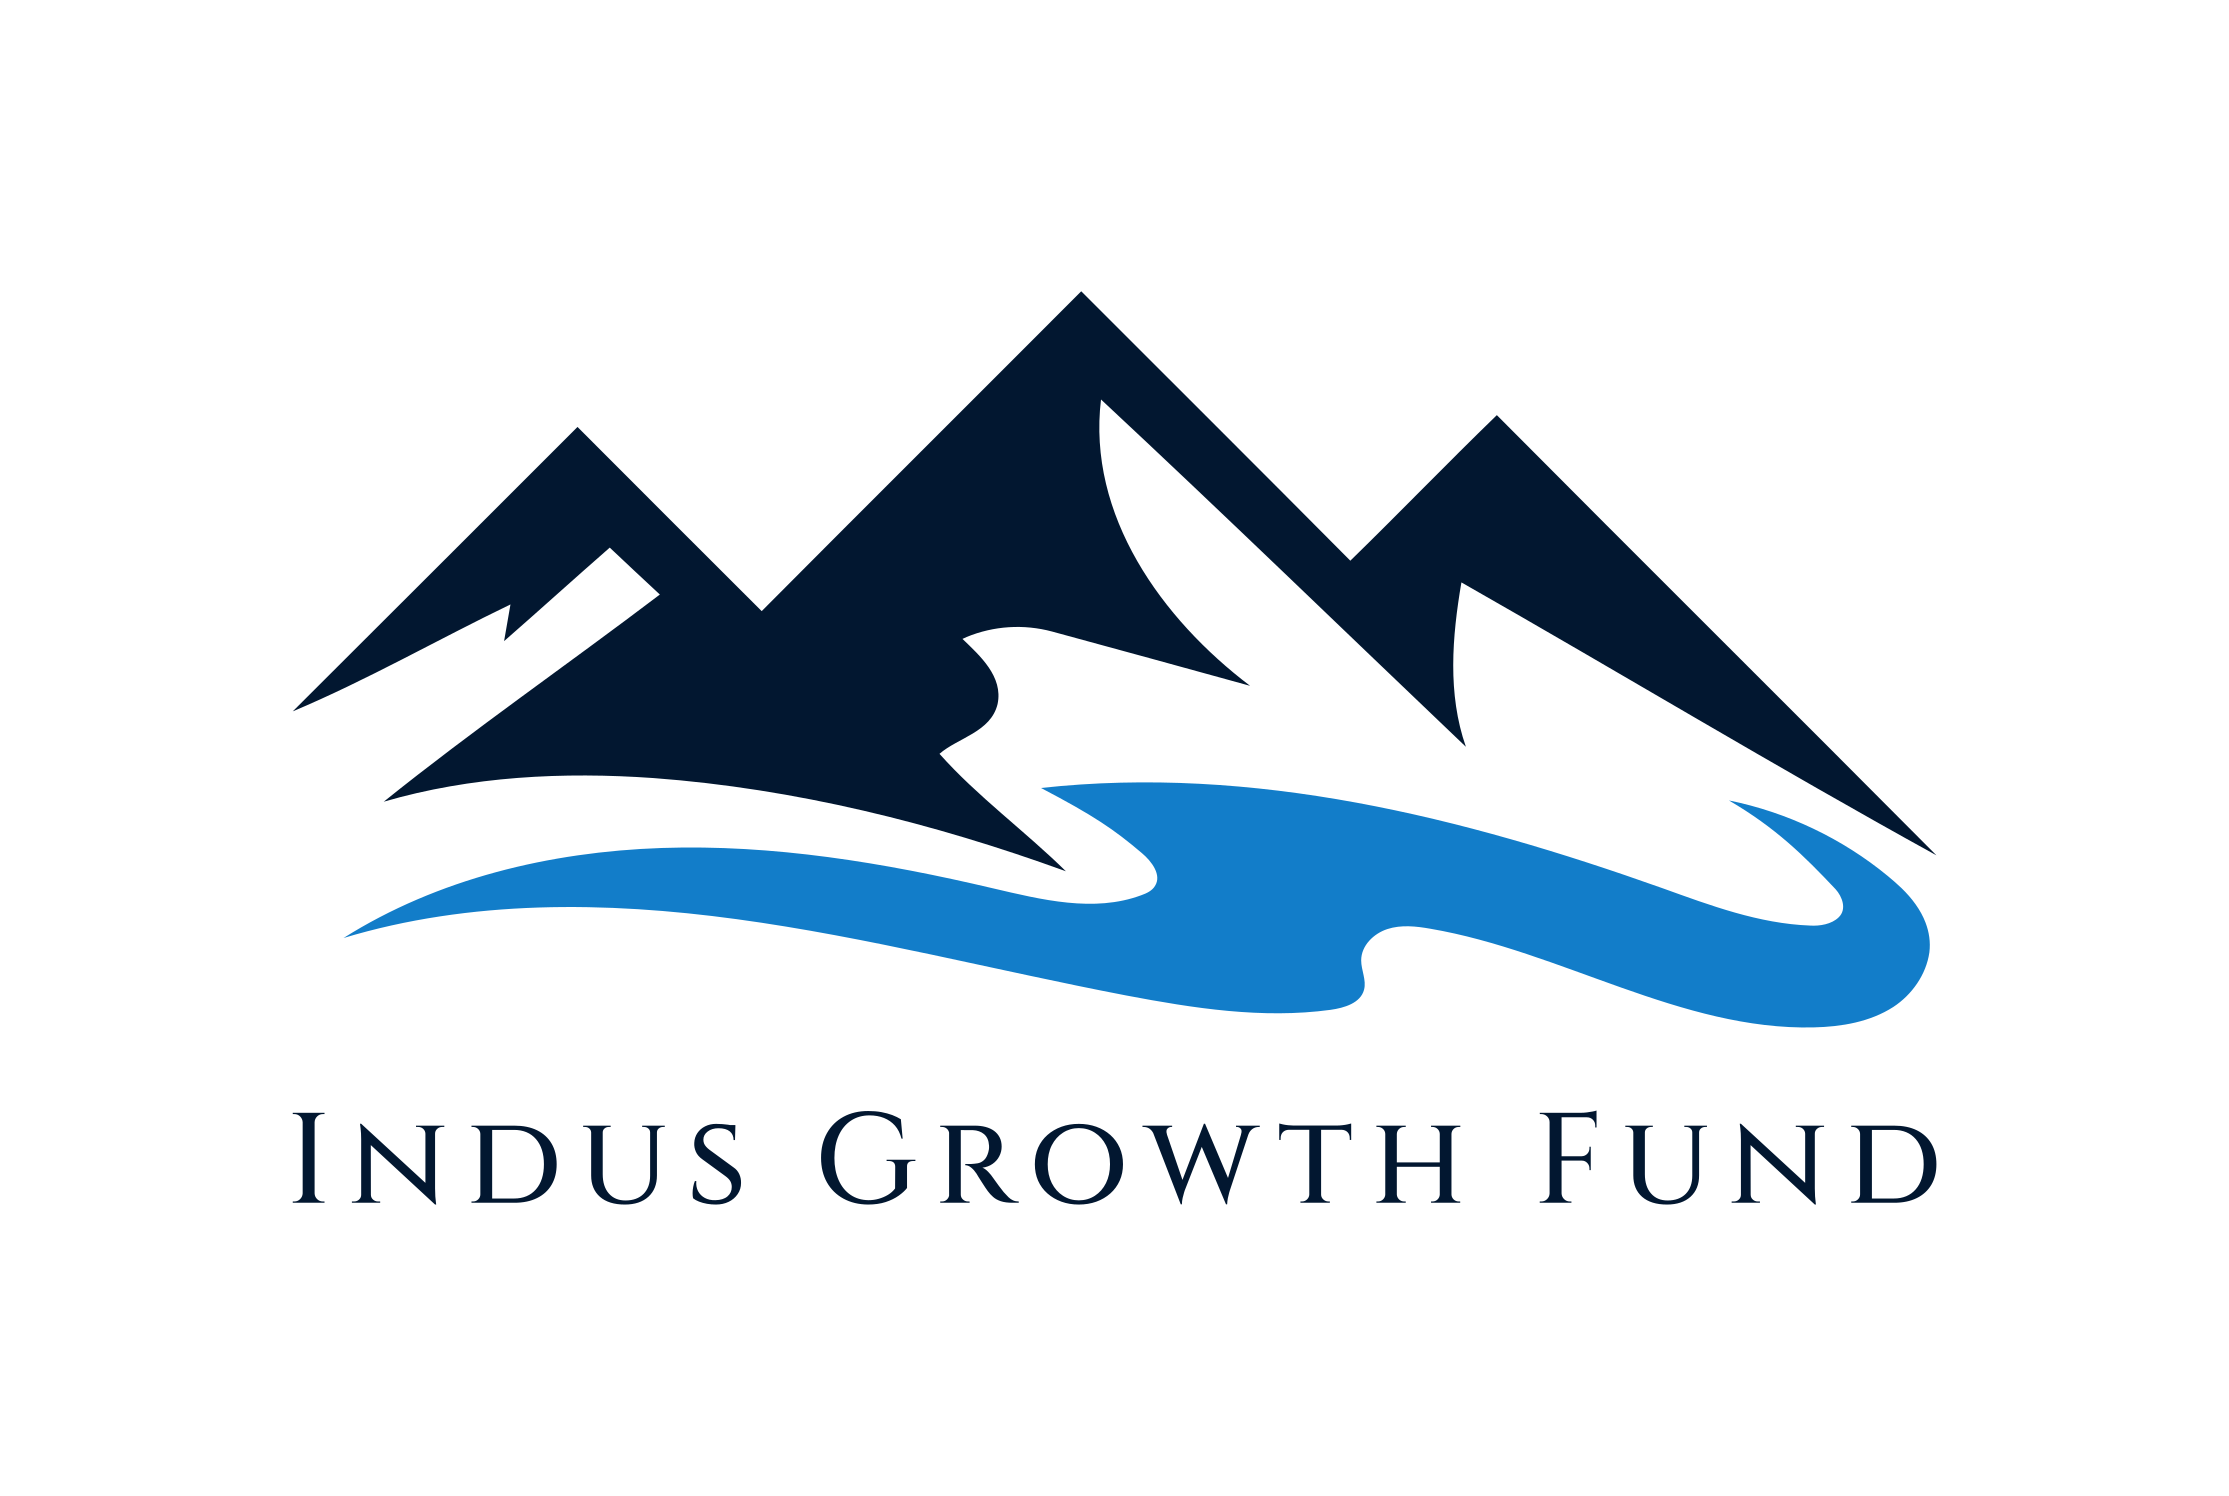 We are Indus Growth Fund